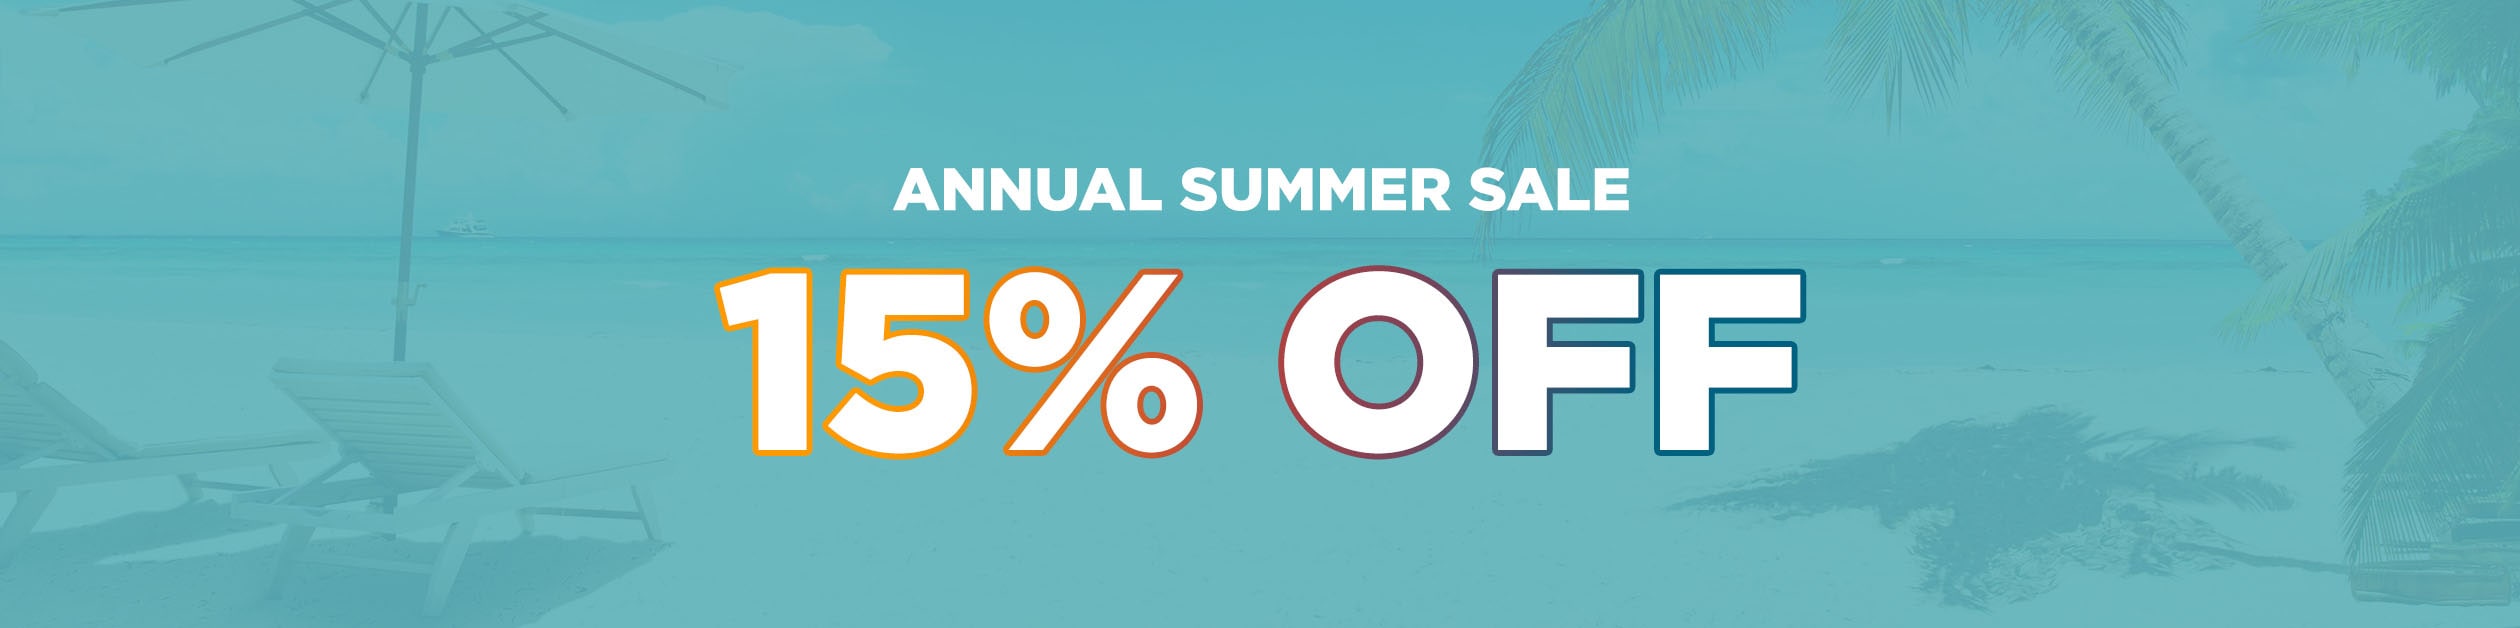 Save 15% with our Annual Summer Sale!